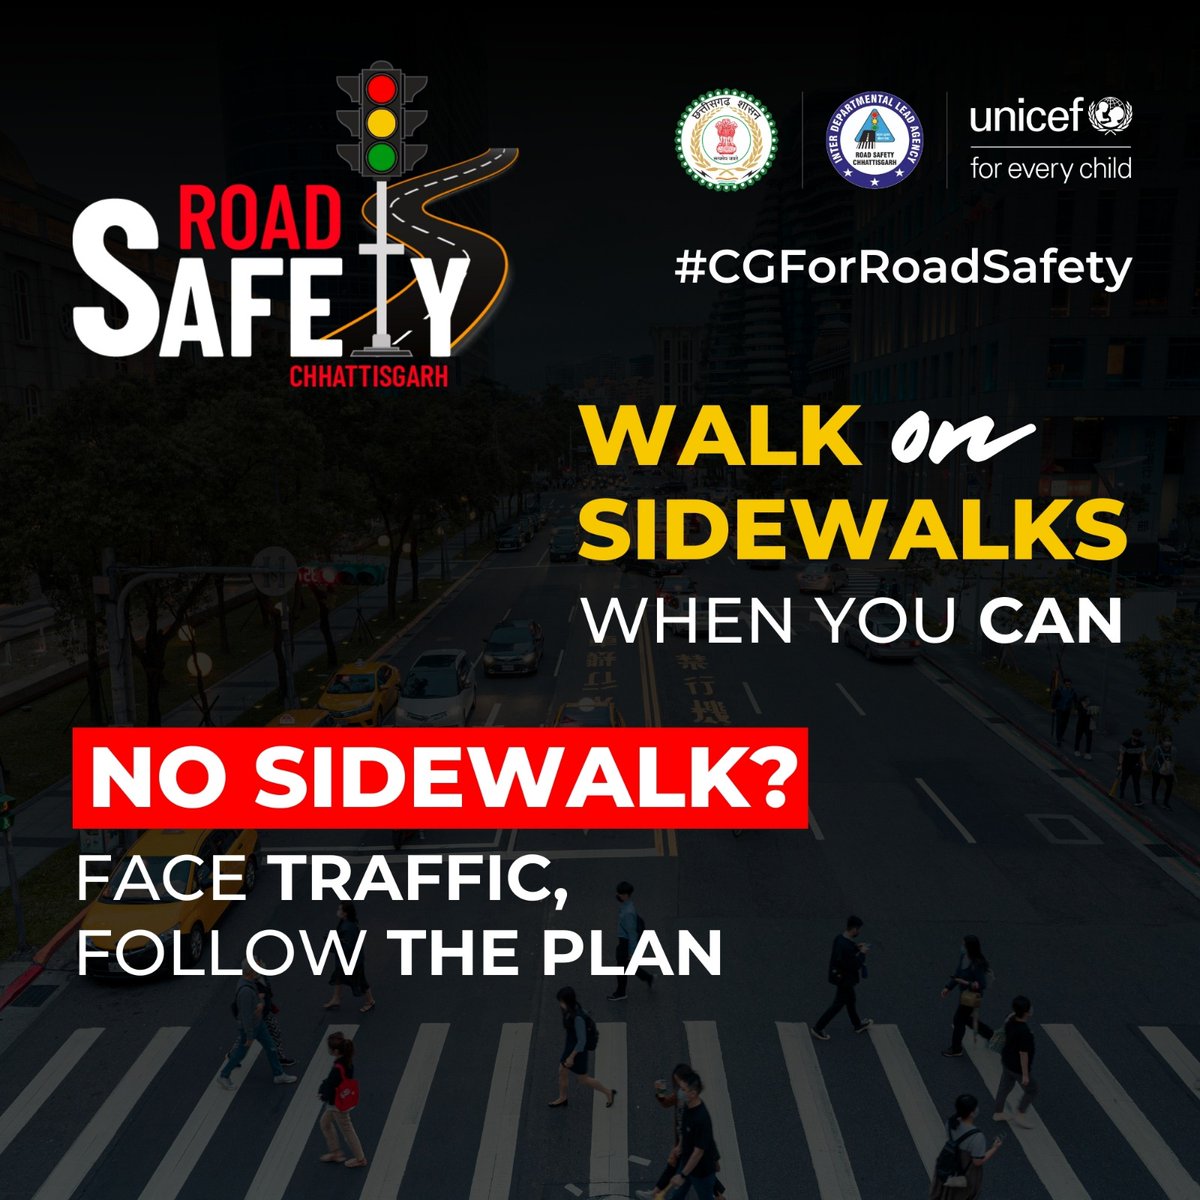 🚶🏻‍♀️🚶Friendly reminder to all pedestrians! Sidewalks are your best path! 👍🏻 Let's walk safely, be aware of traffic, and make our streets a shared & organized space for everyone. #CGForRoadSafety @UNICEFIndia @RoadSafetyCG